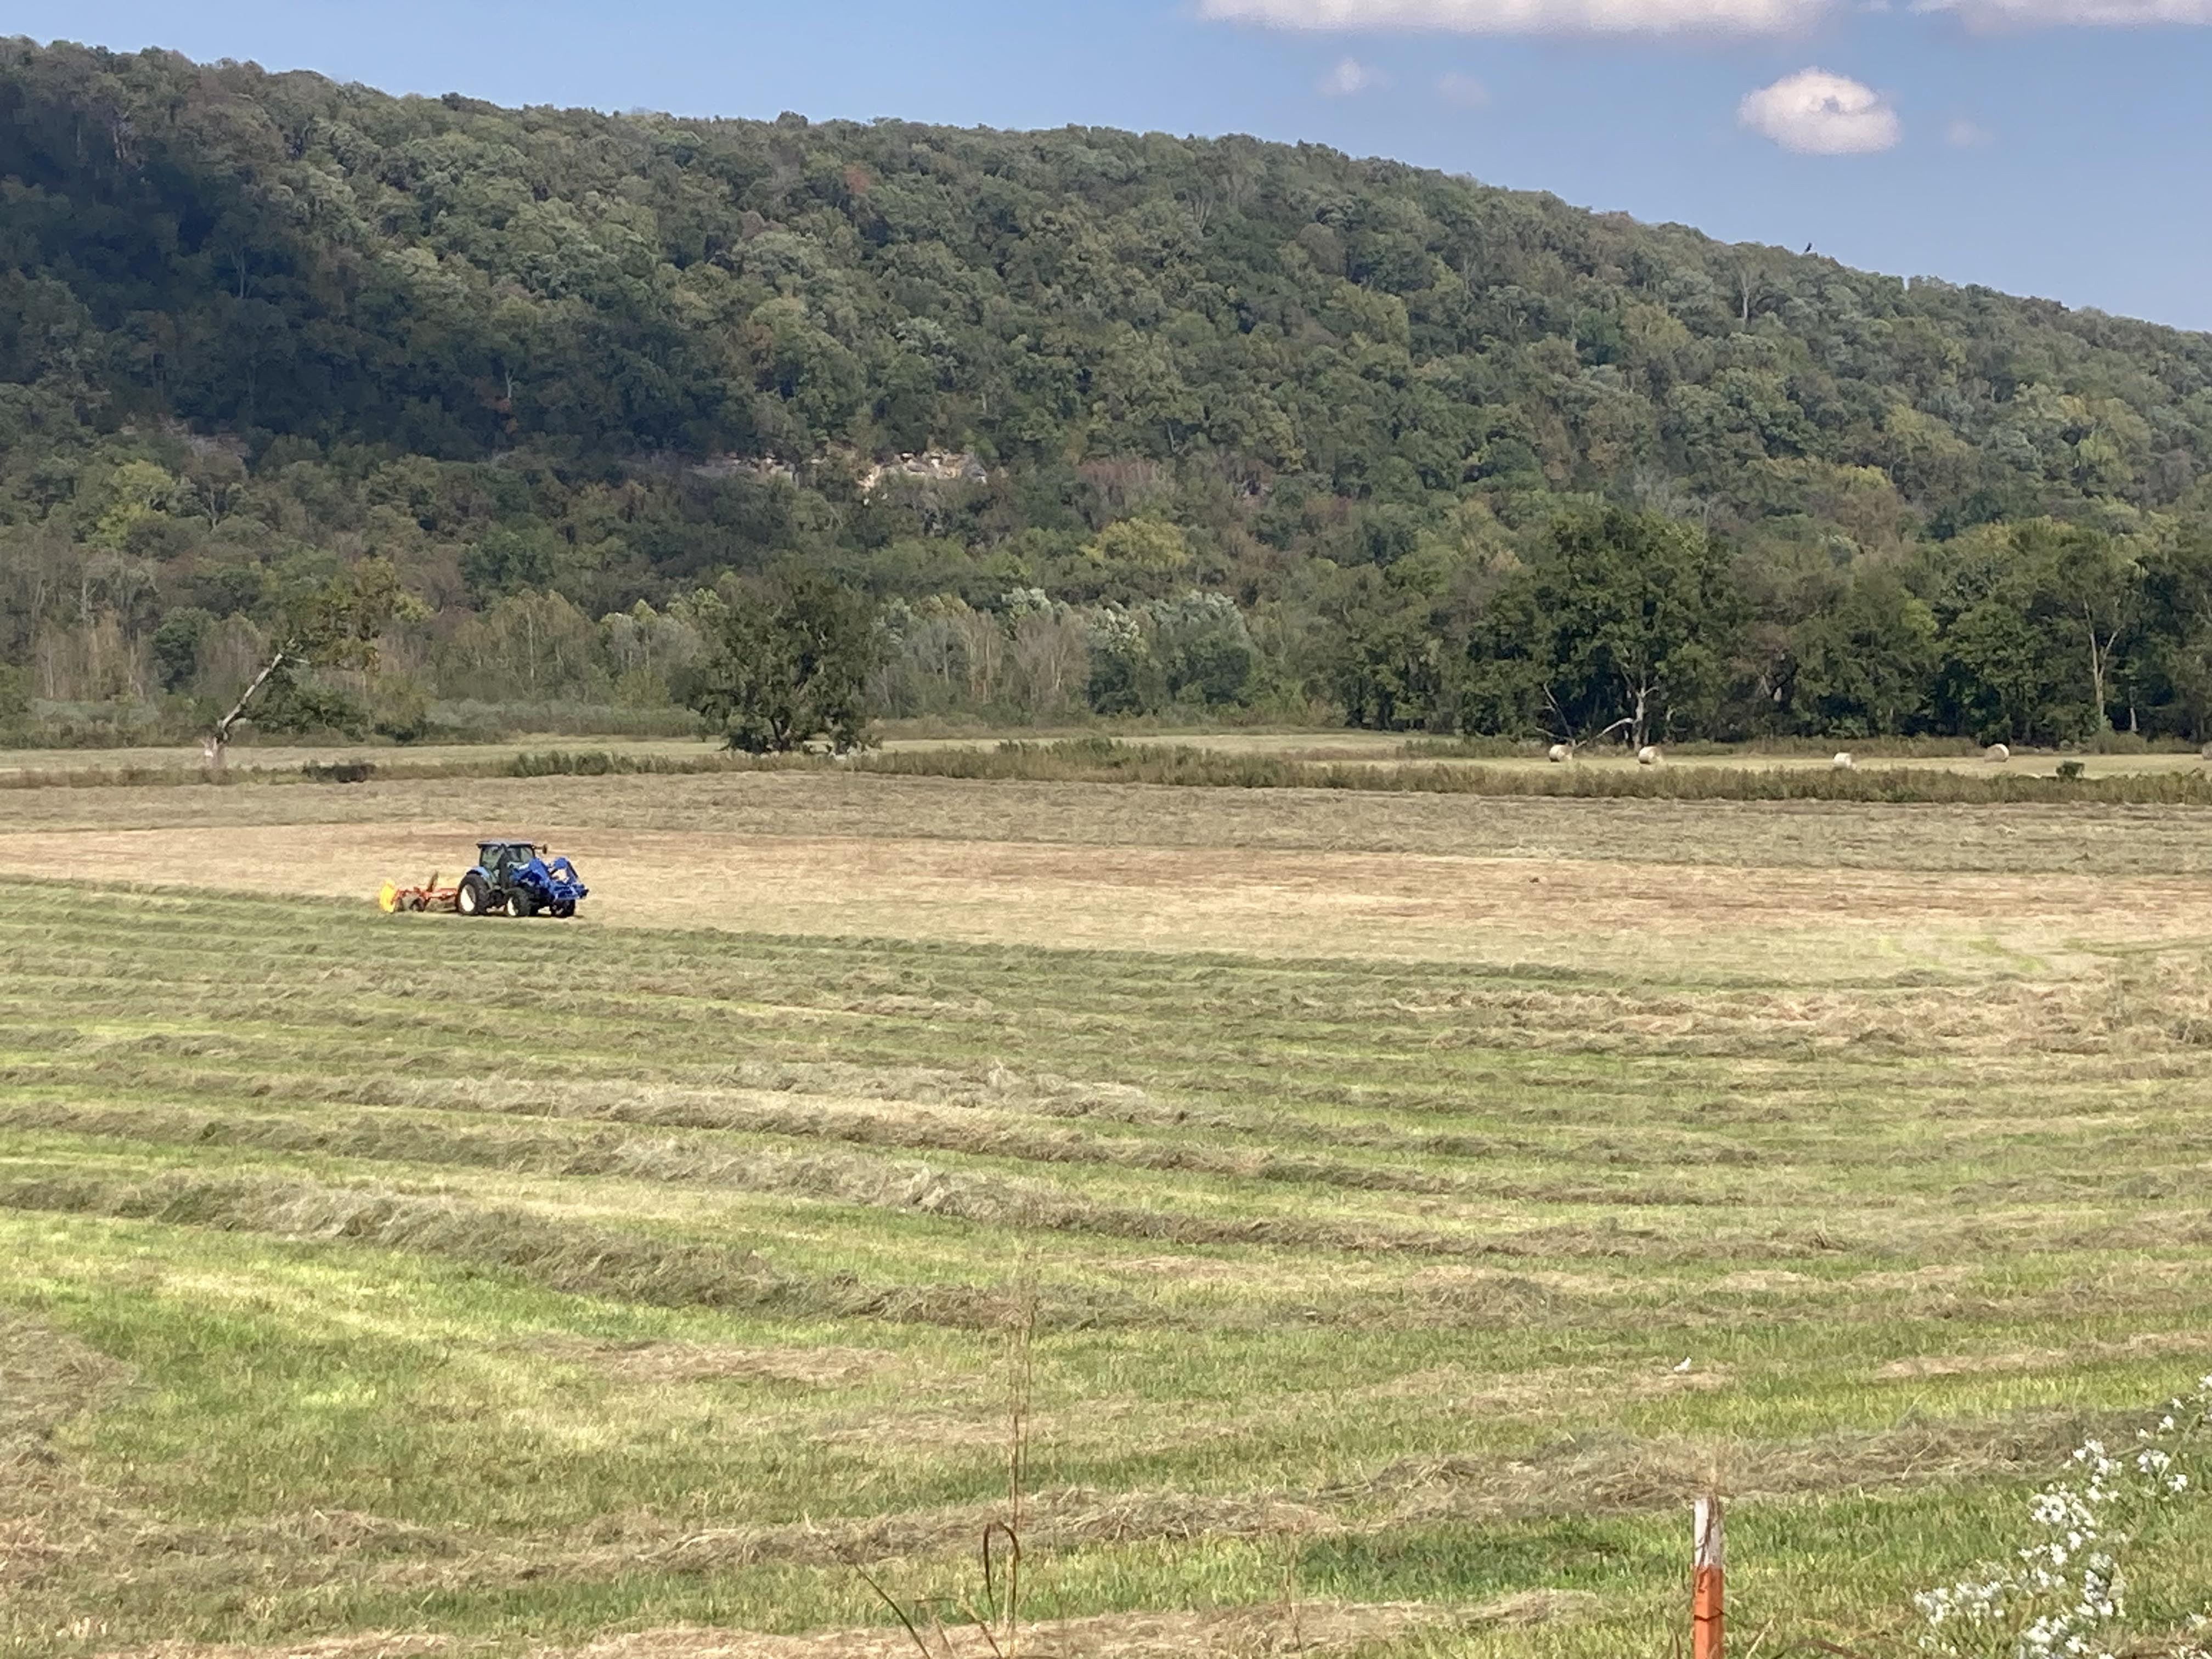 A tractor harvesting a large field of fescue grass.